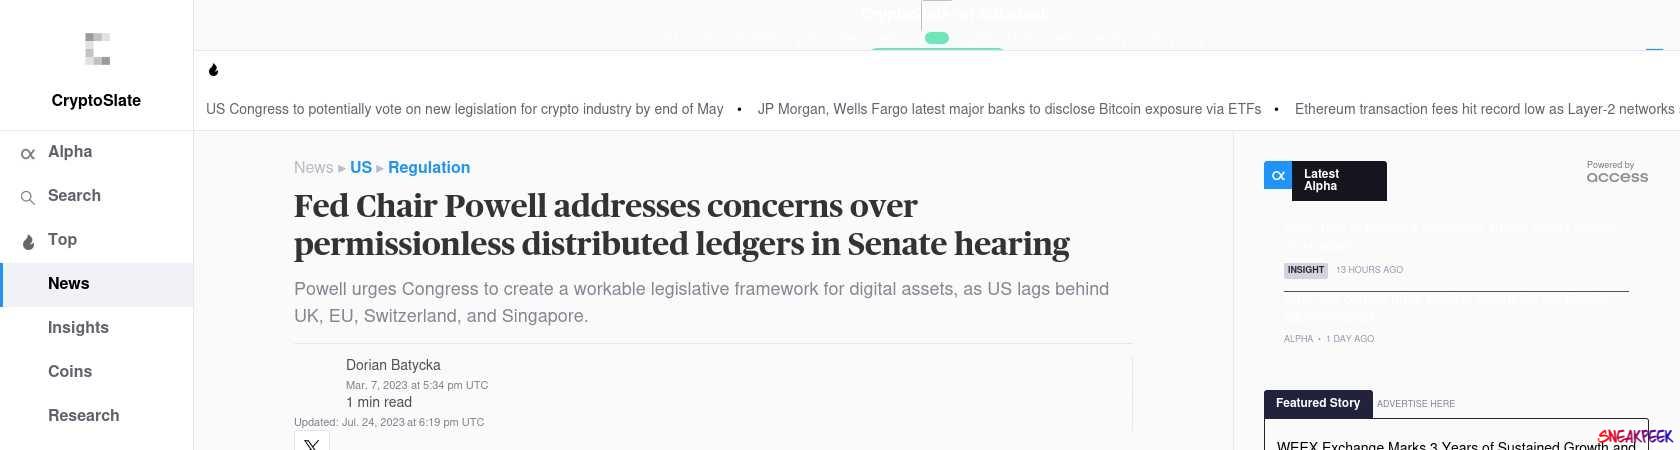 Read the full Article:  ⭲ Fed Chair Powell addresses concerns over permissionless distributed ledgers in Senate hearing